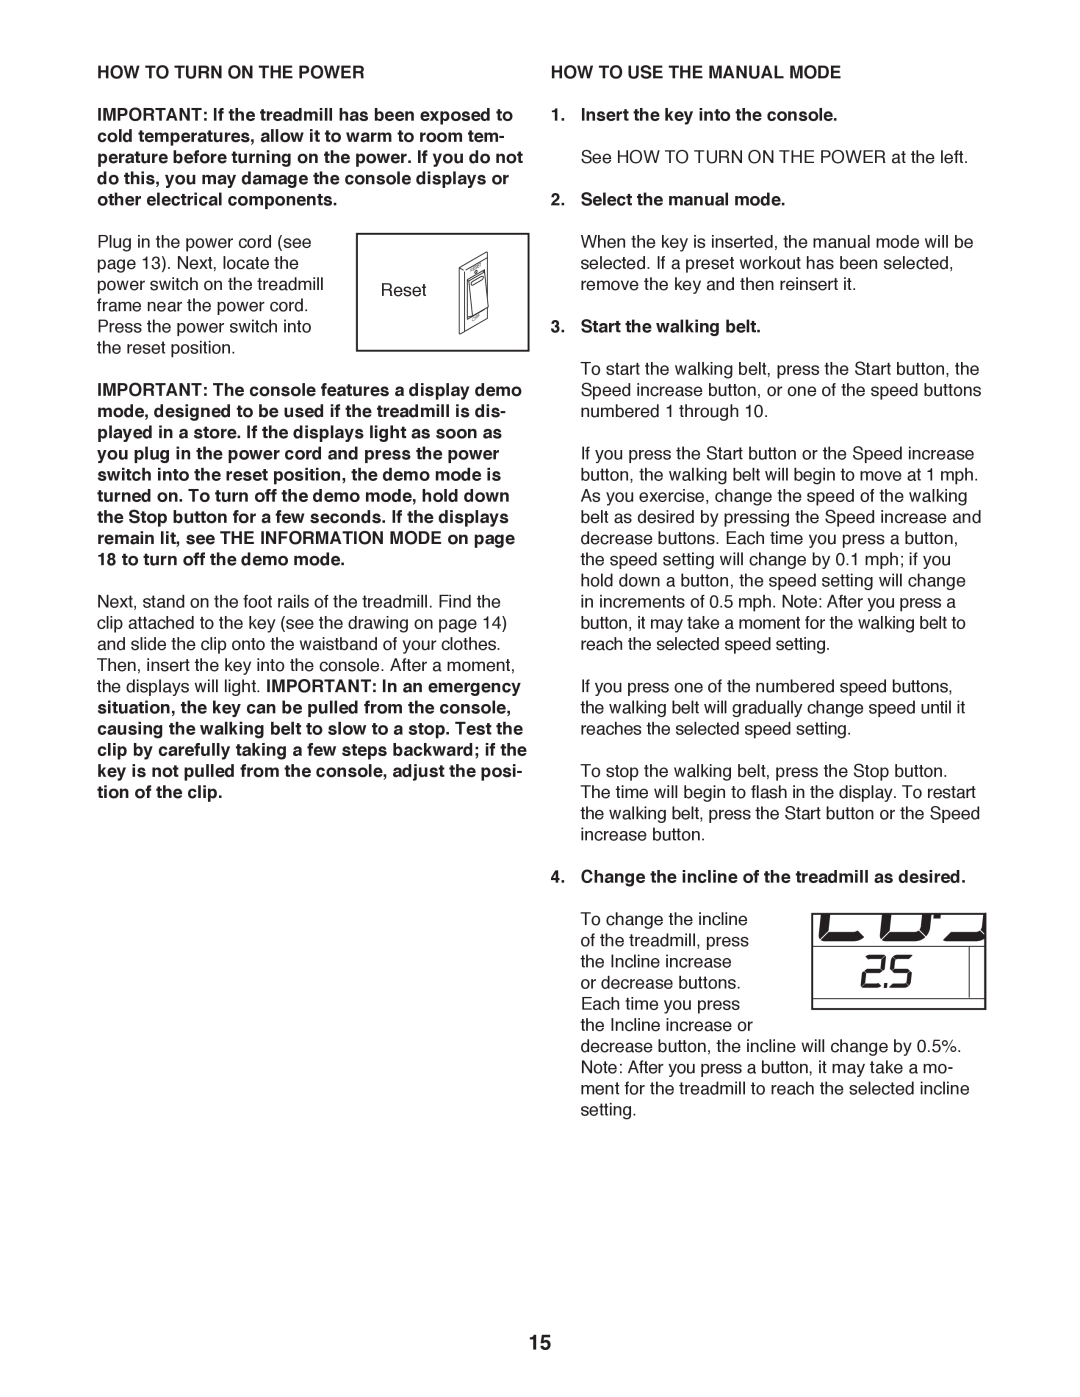 ProForm 397 user manual How To Turn On The Power, HOW TO USE THE MANUAL MODE 1. Insert the key into the console 